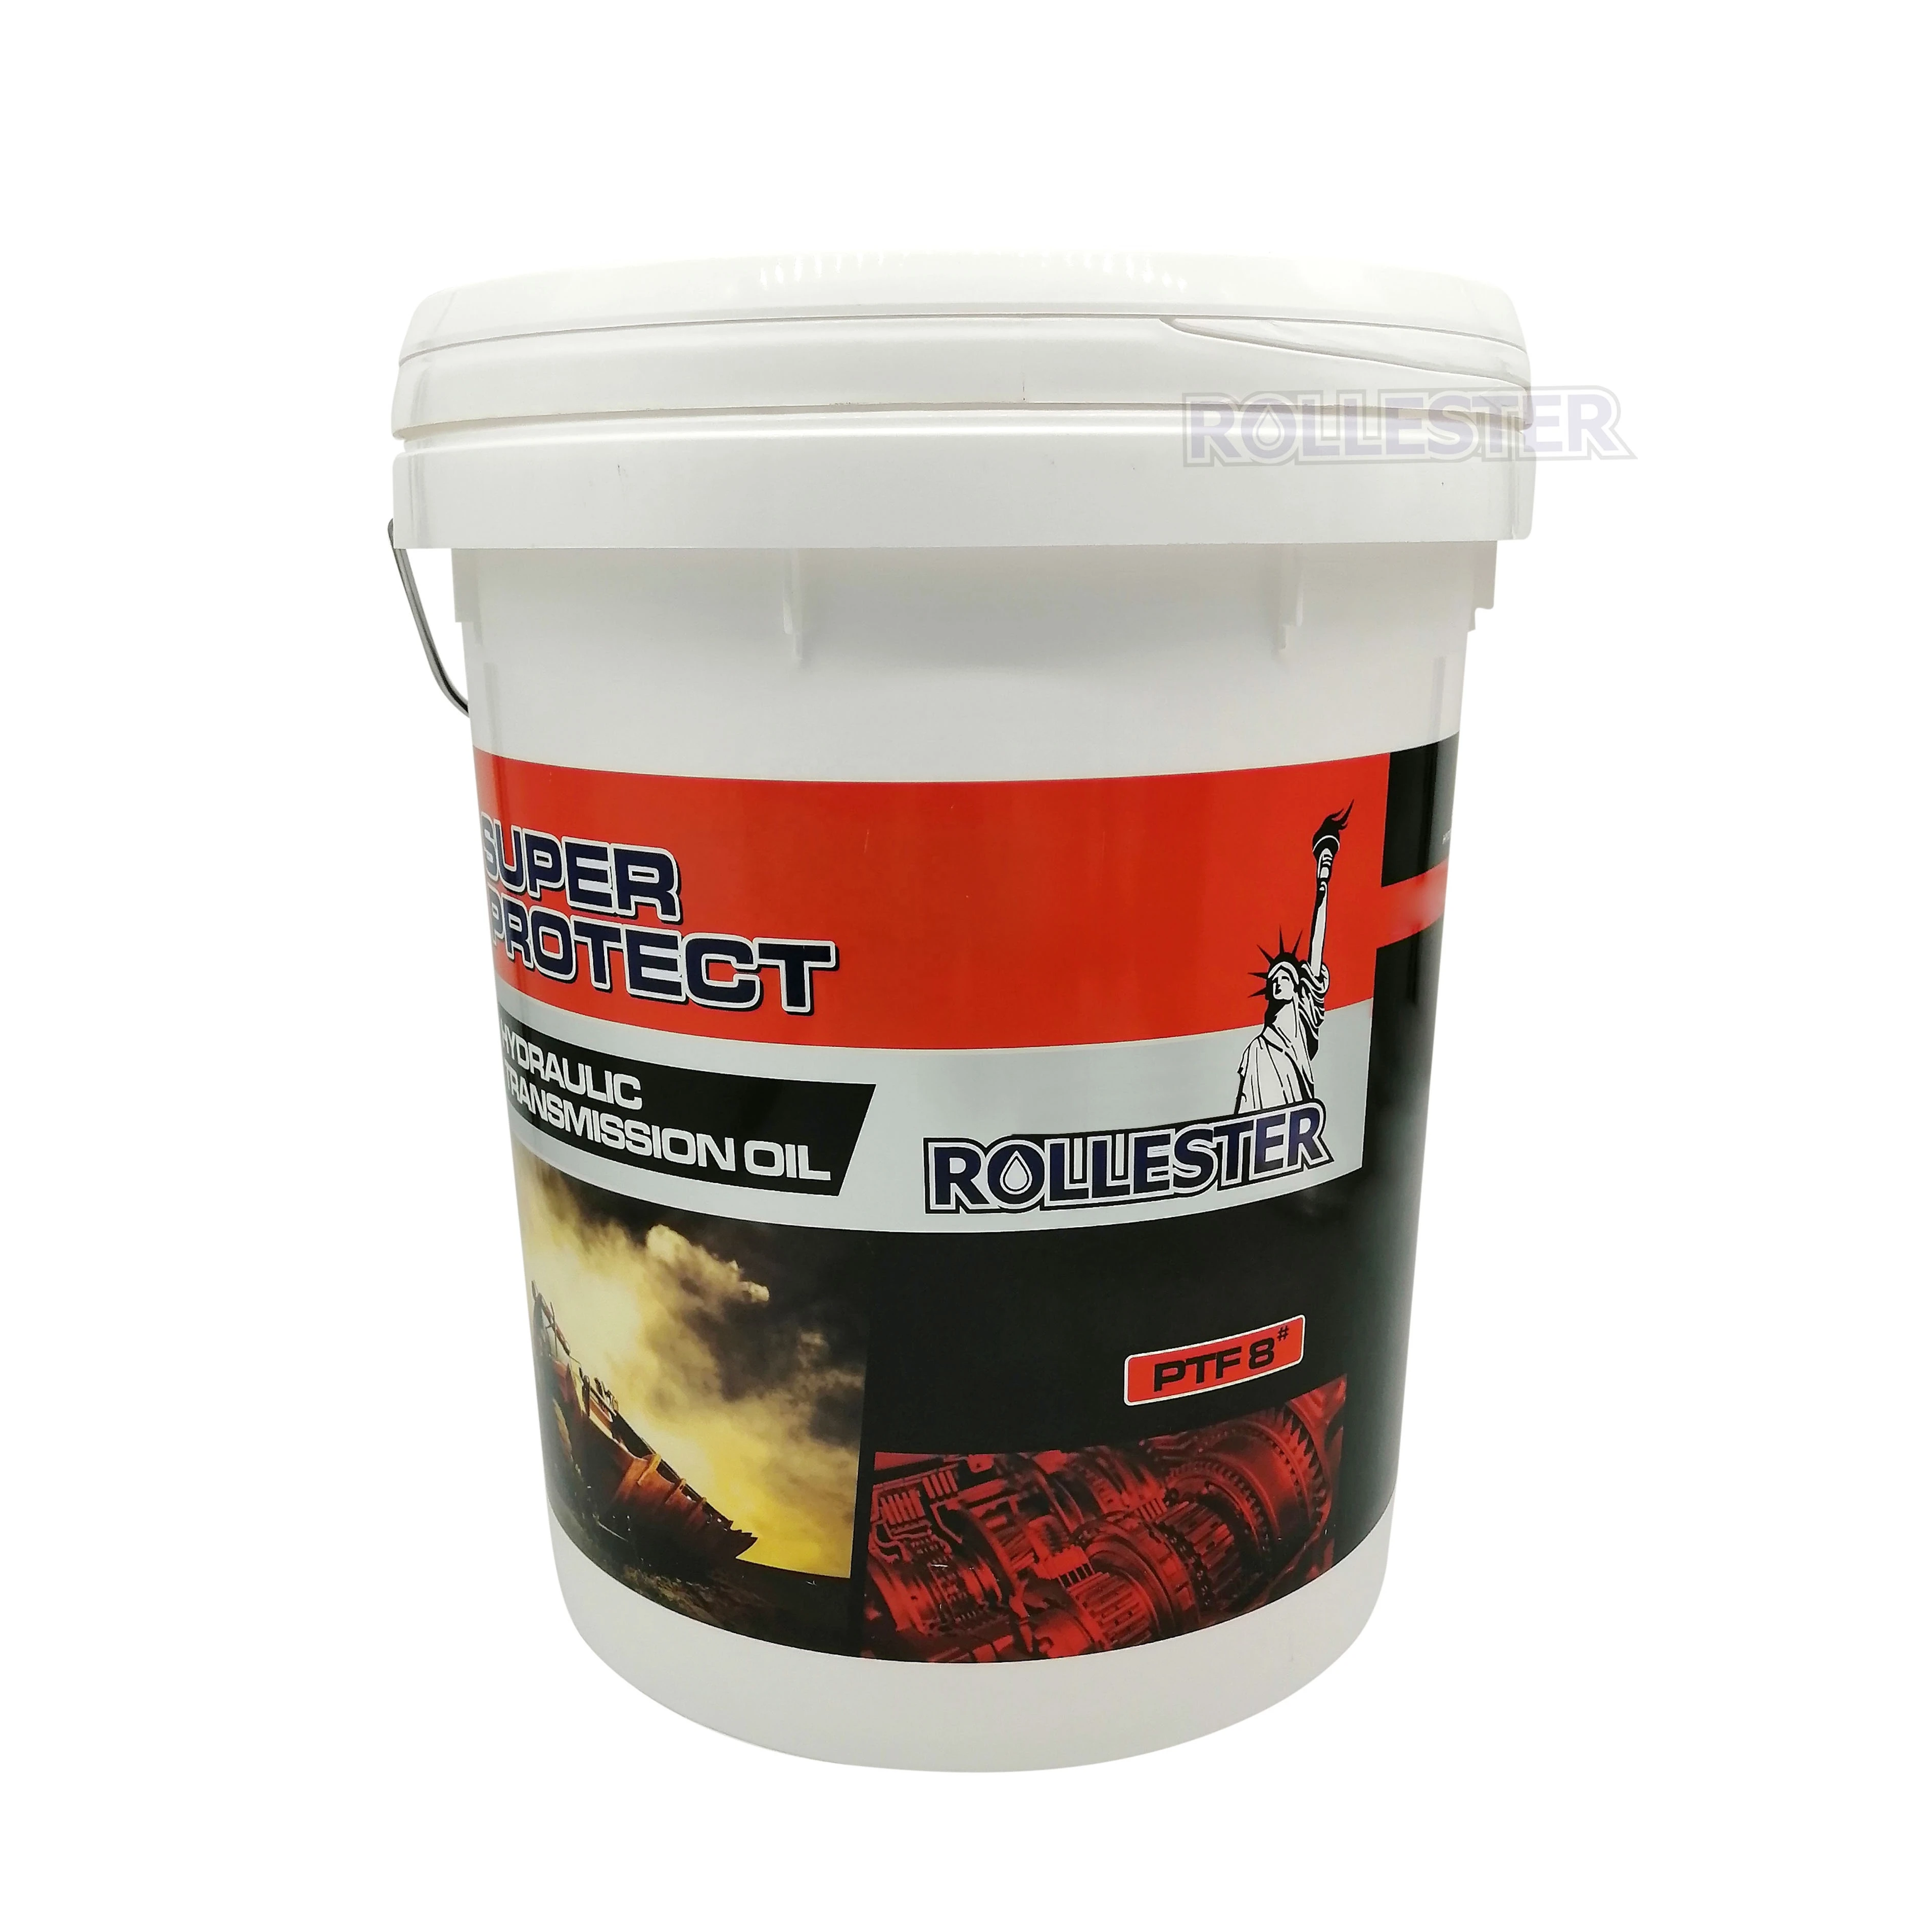 ROLLESTER Long Life #68 Hydraulic Lubricant Oil